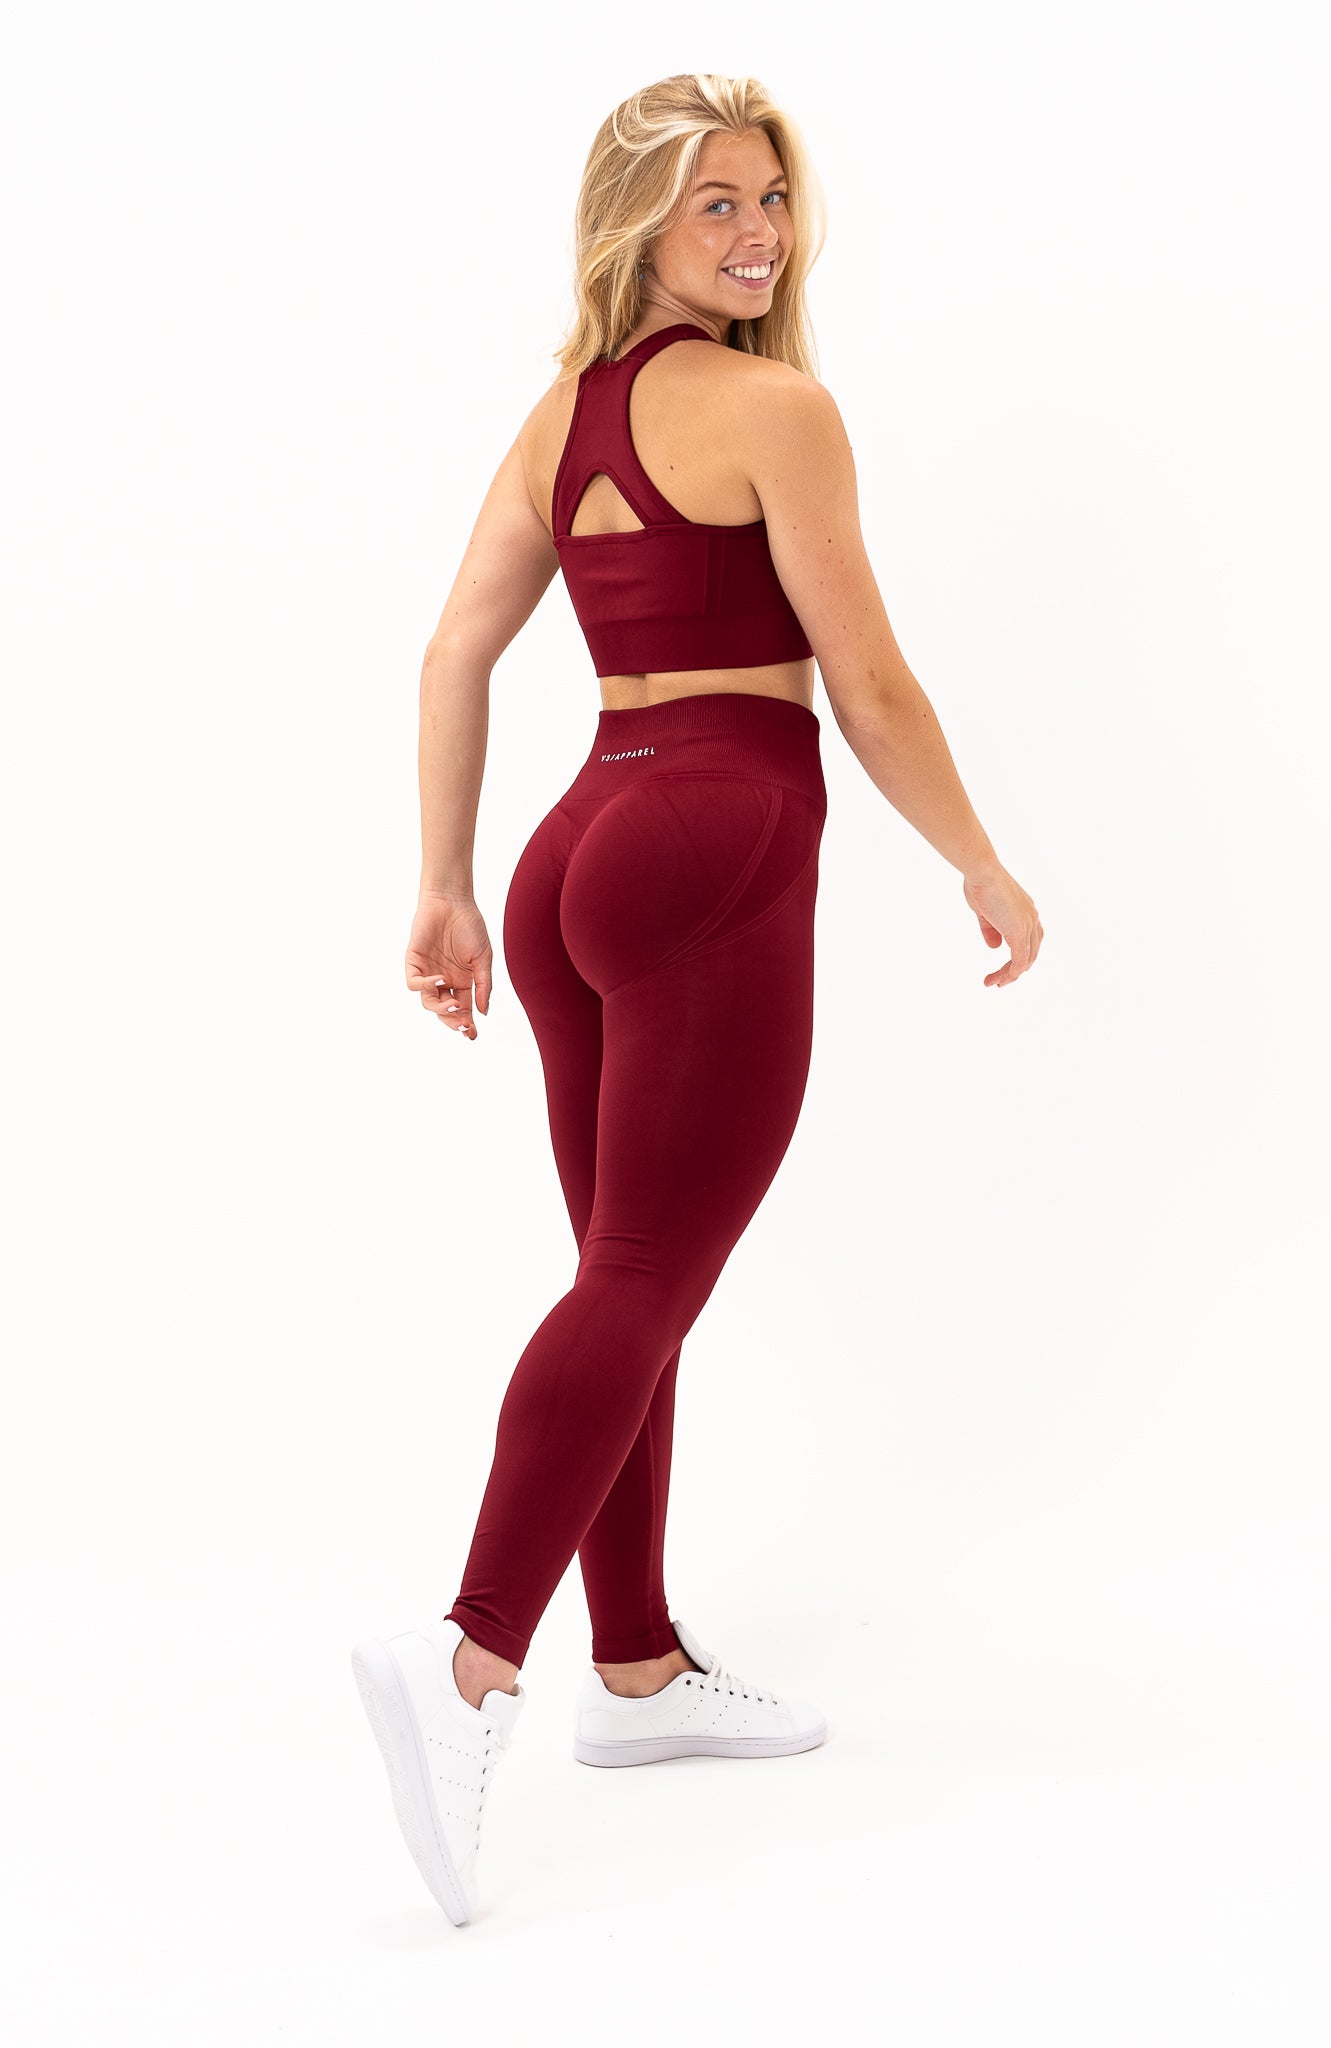 redbaysand Women's Tempo seamless scrunch bum shaping high waisted leggings and training sports bra in burgundy red – Squat proof sports tights and training bra for Gym workouts training, Running, yoga, bodybuilding and bikini fitness.